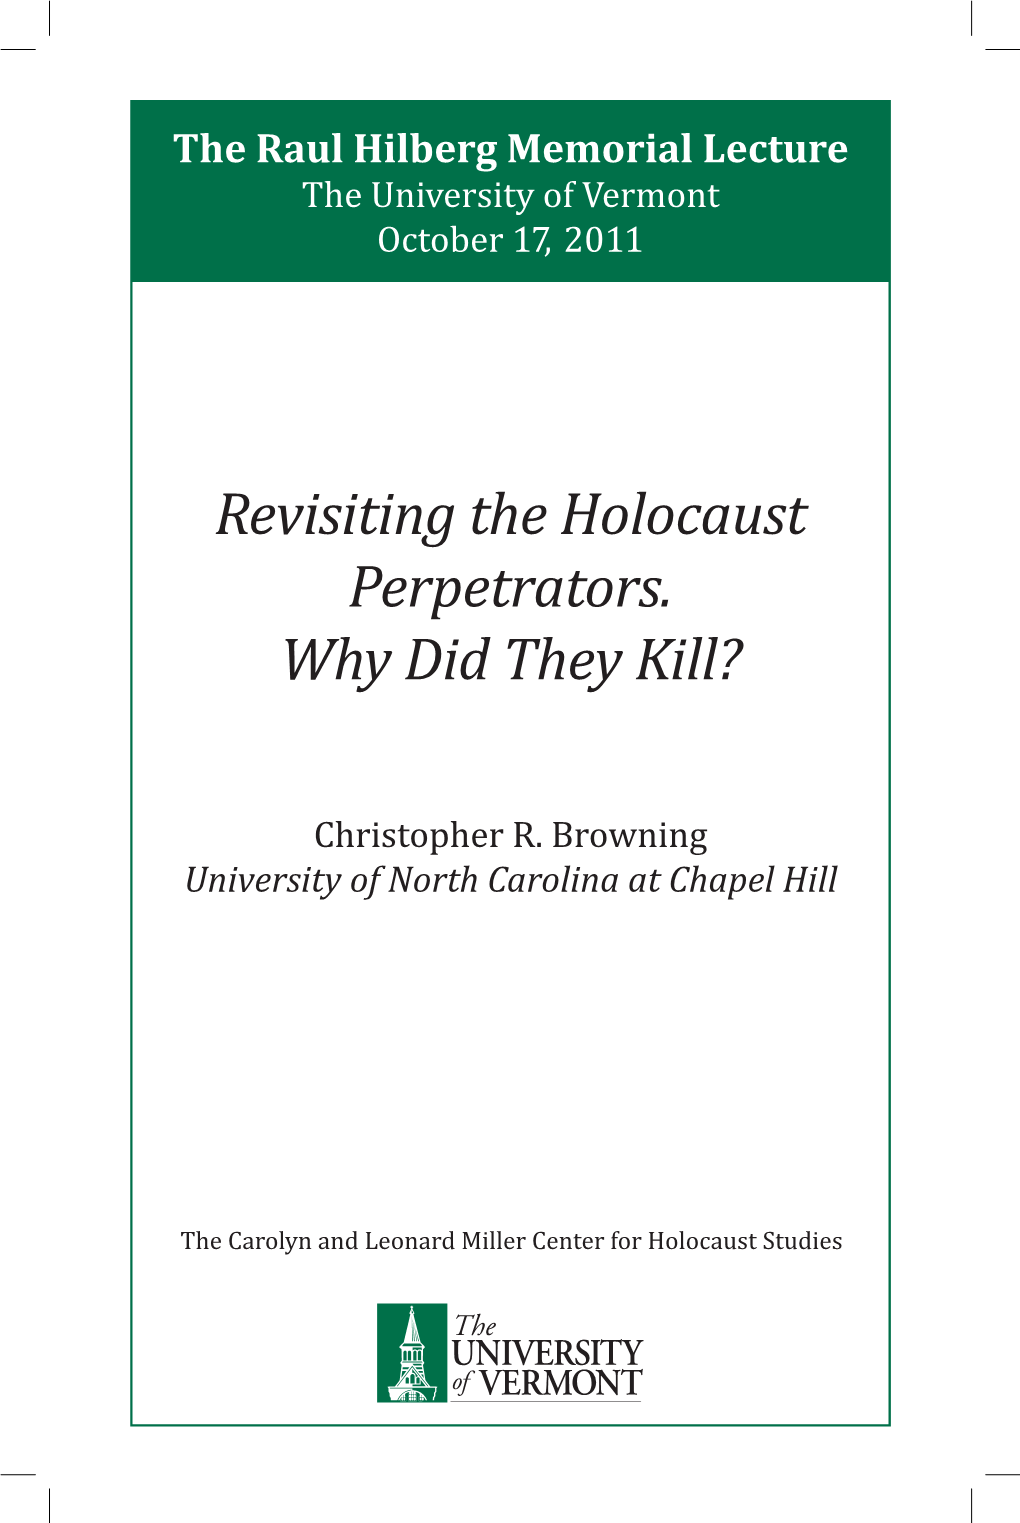 Revisiting the Holocaust Perpetrators. Why Did They Kill?